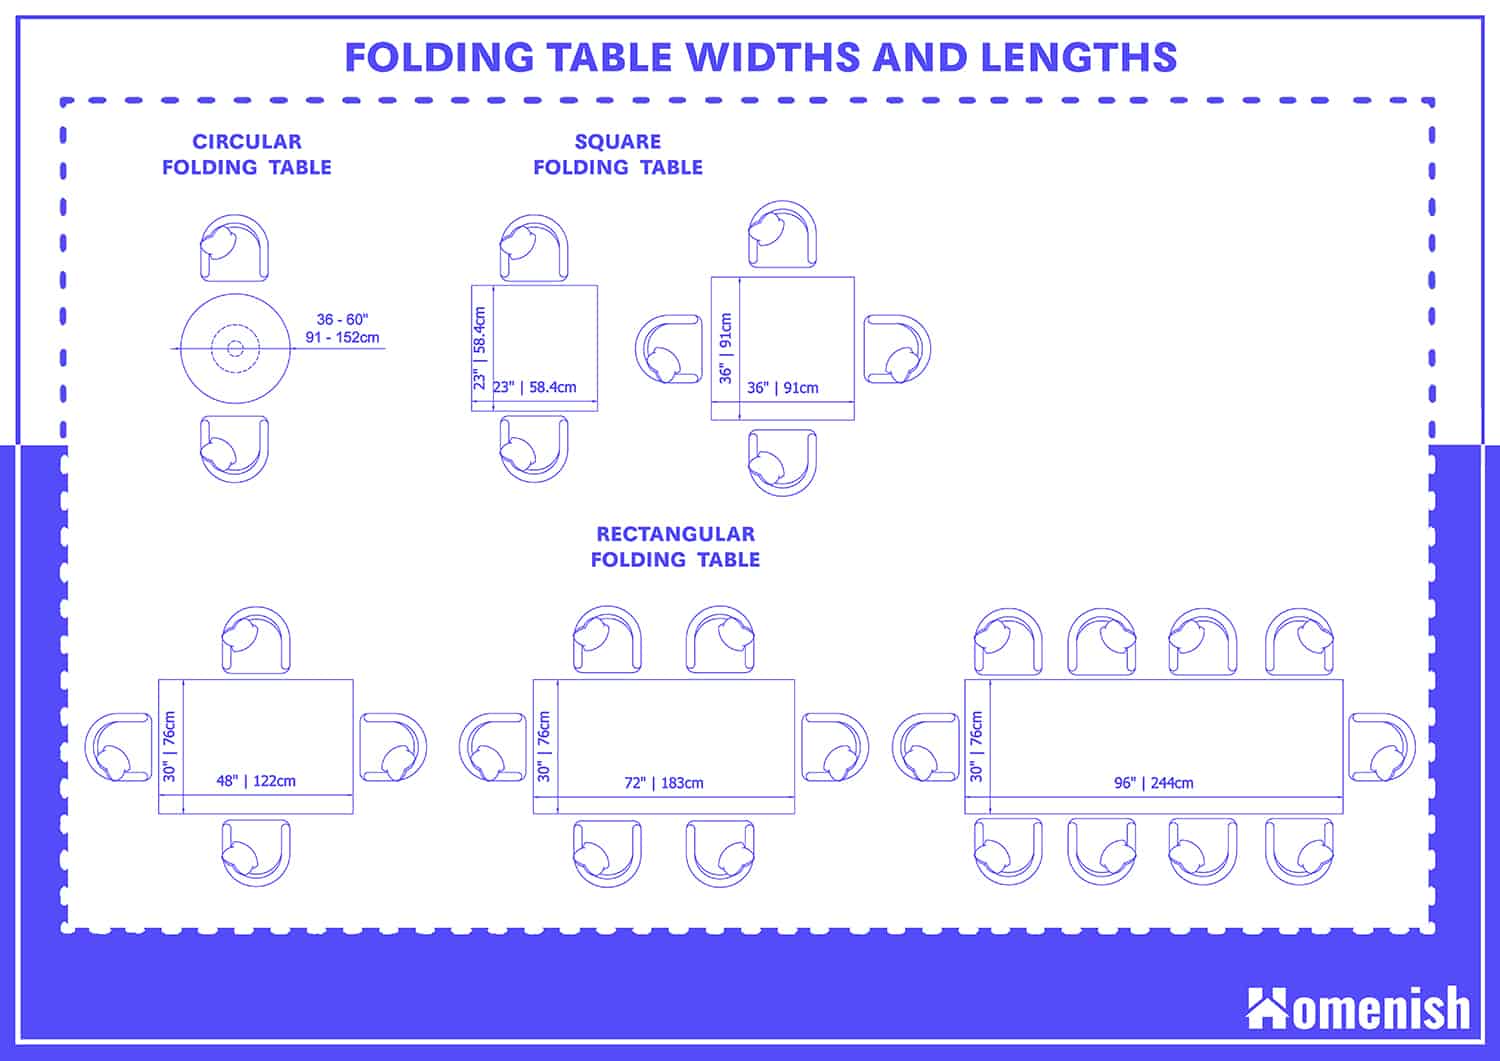 Folding Table Widths and Lengths